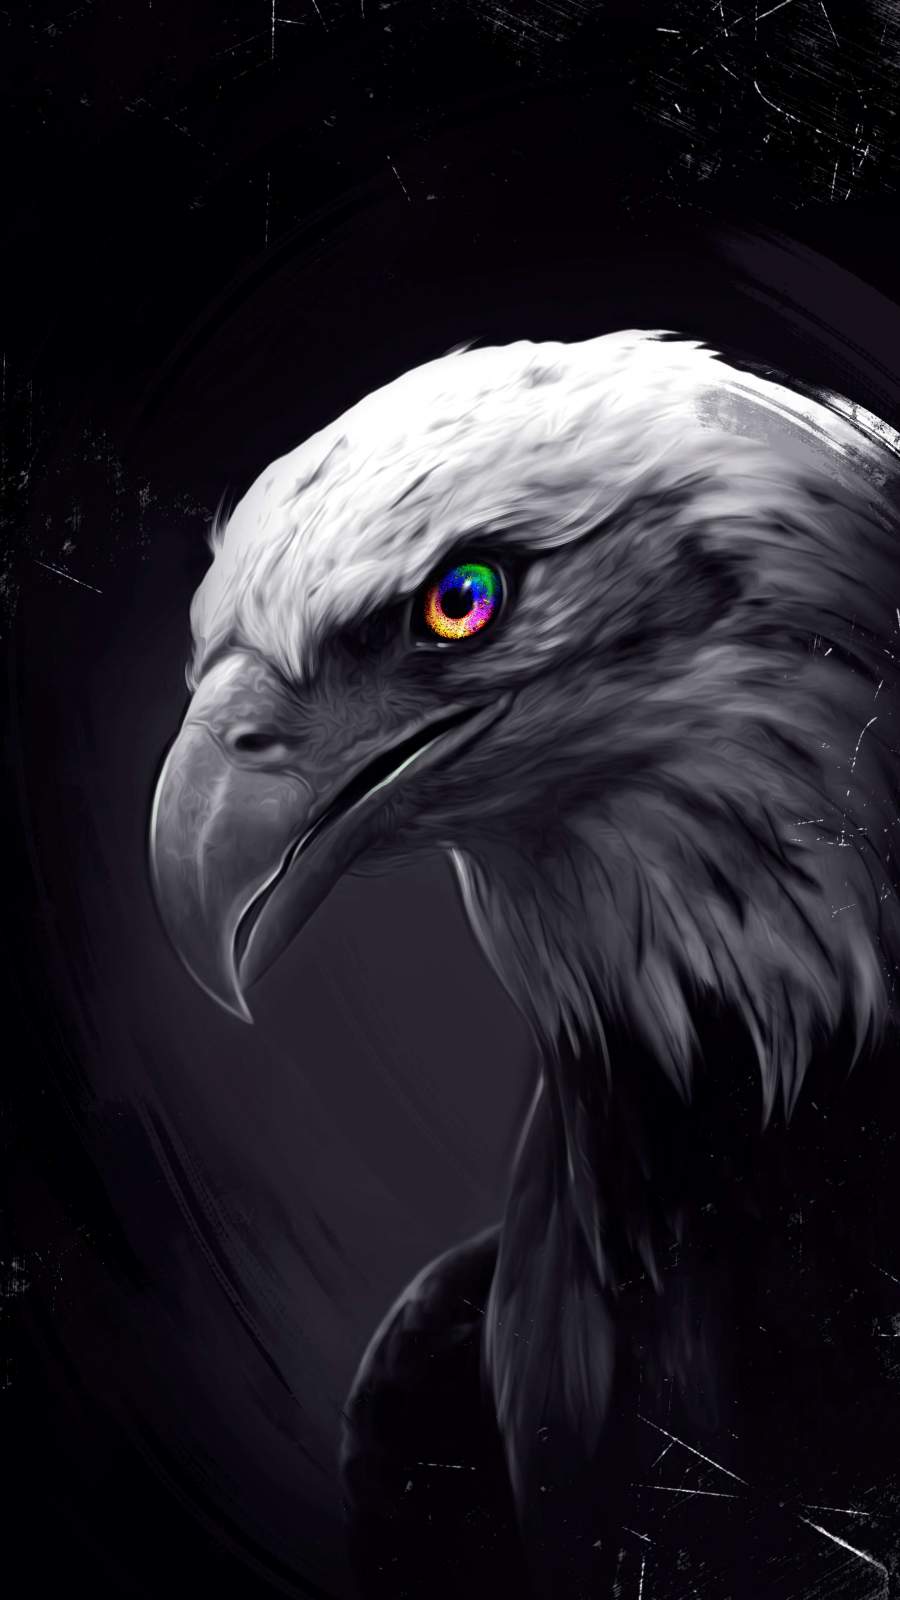 Eagle Eyes IPhone Wallpaper - IPhone Wallpapers : iPhone Wallpapers